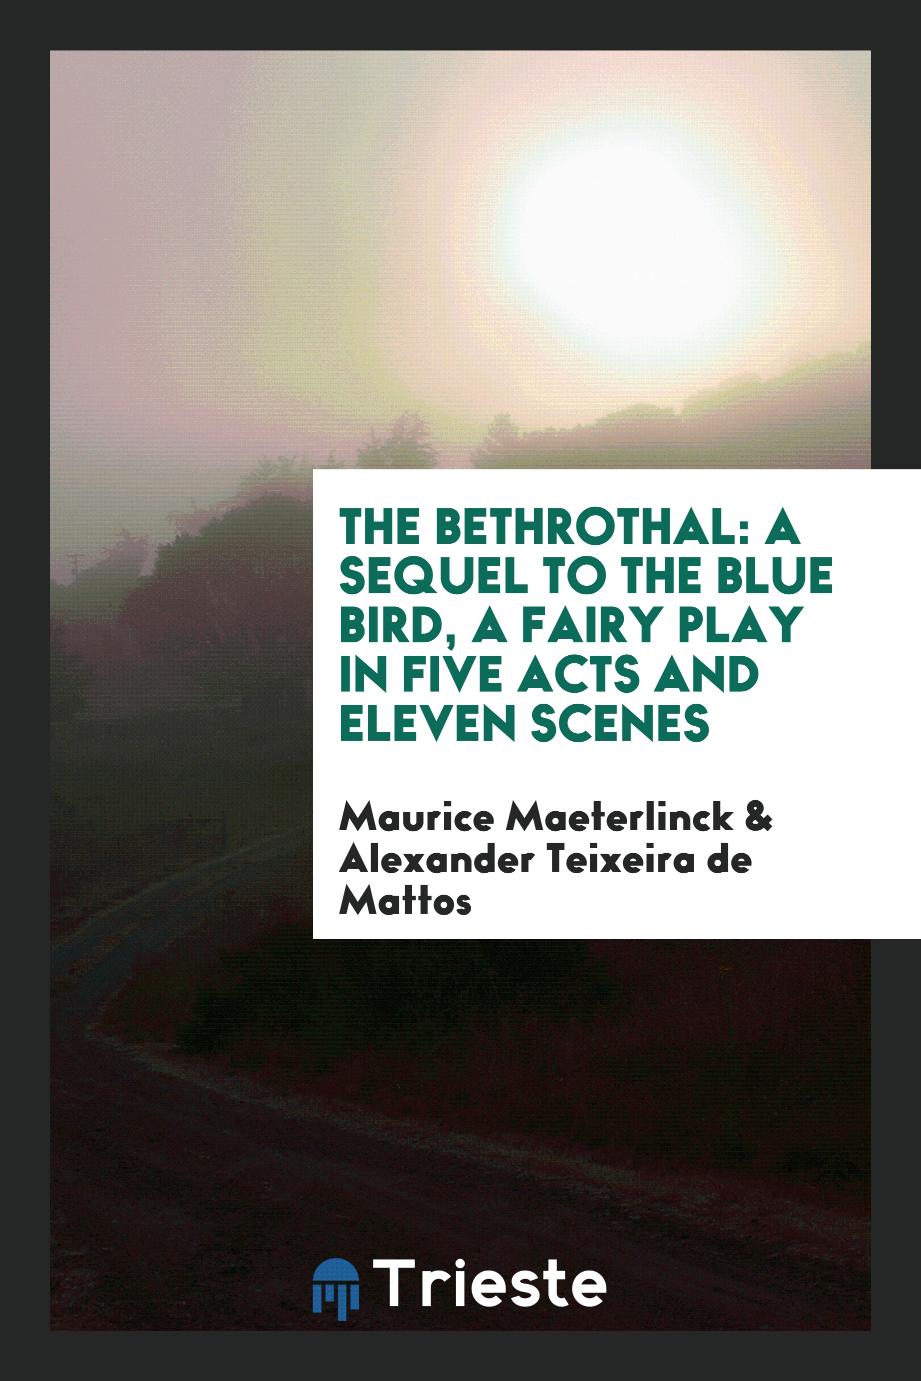 The Bethrothal: A Sequel to the Blue Bird, a Fairy Play in Five Acts and Eleven Scenes